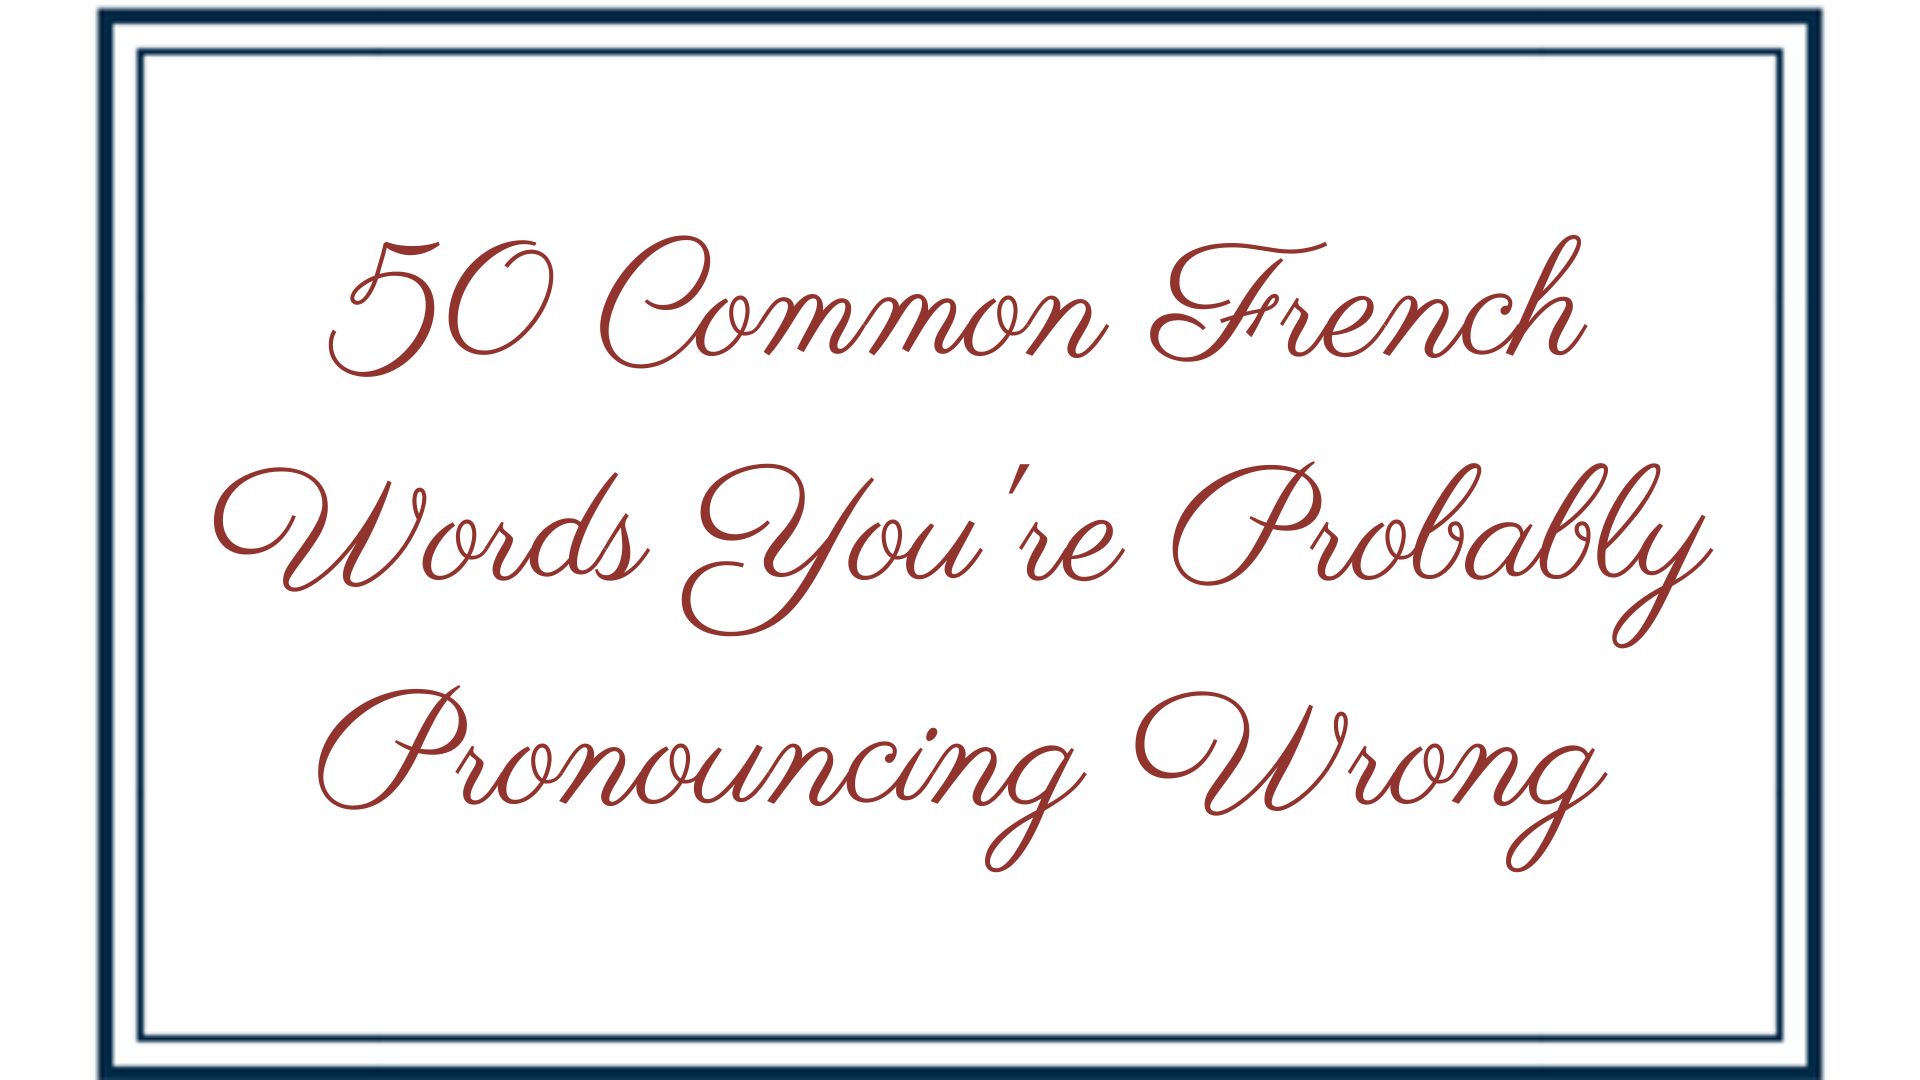 Common French Words